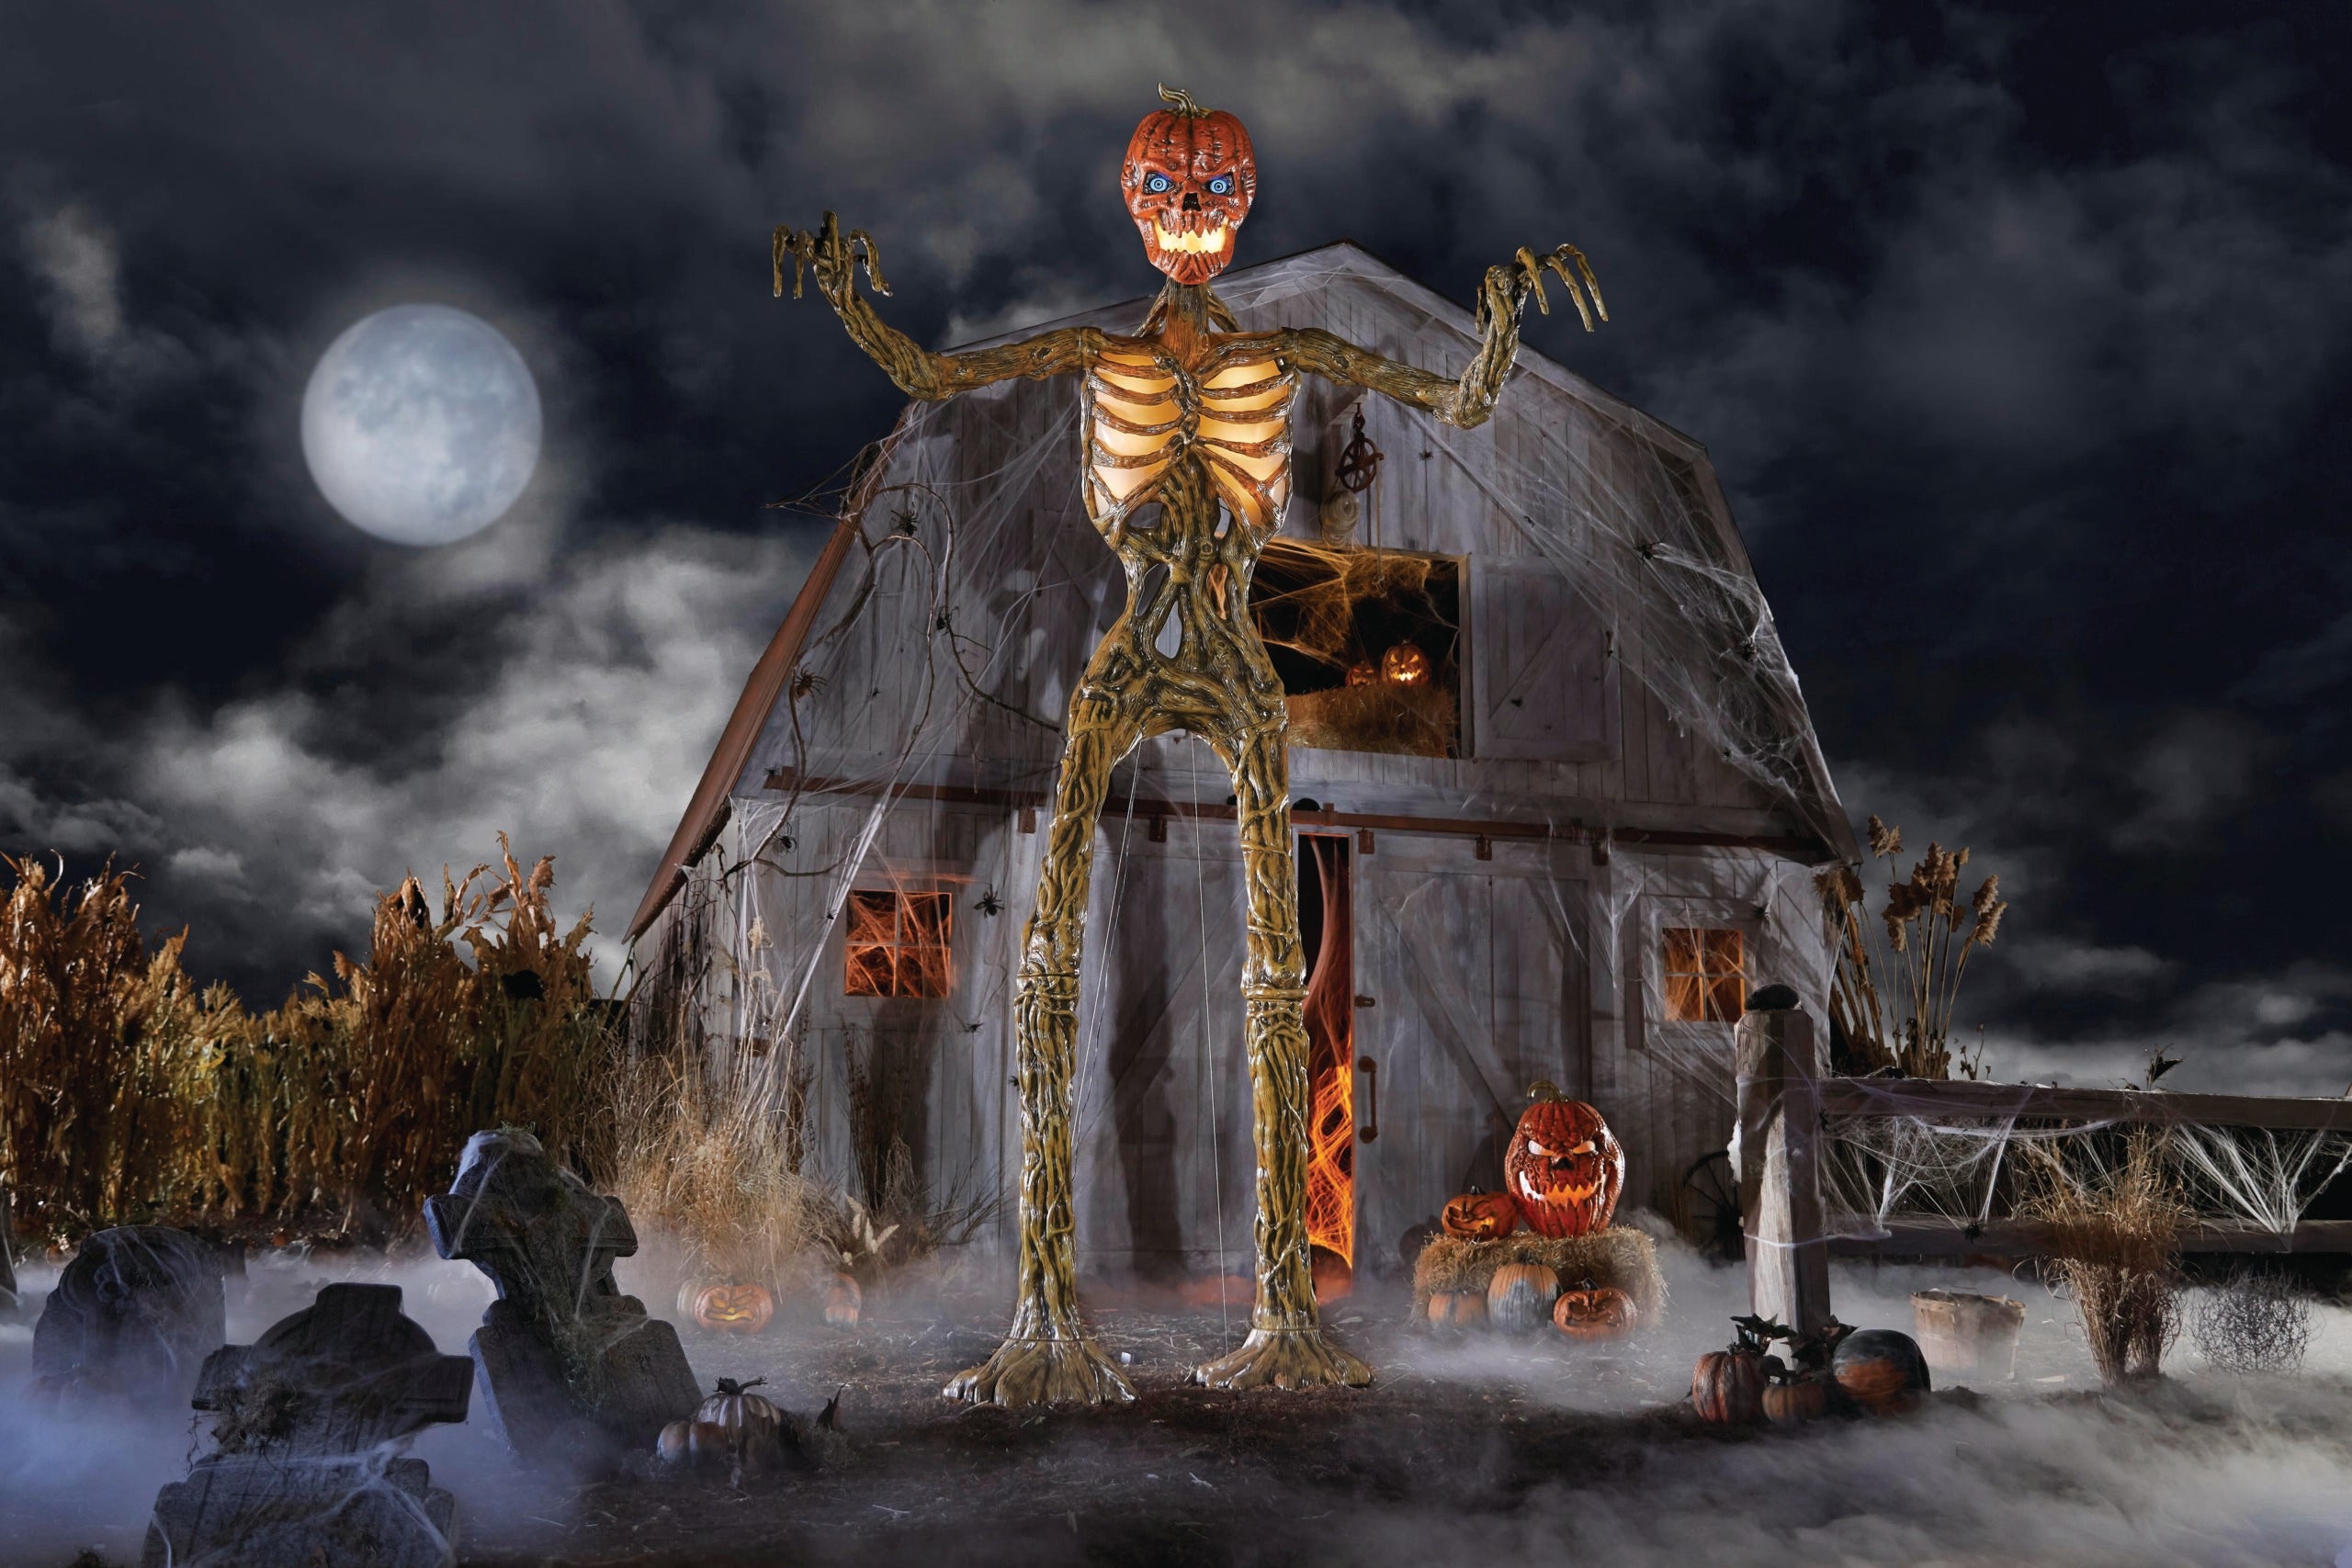 The Giant Home Depot Skeleton Is Back in Stock for 2021